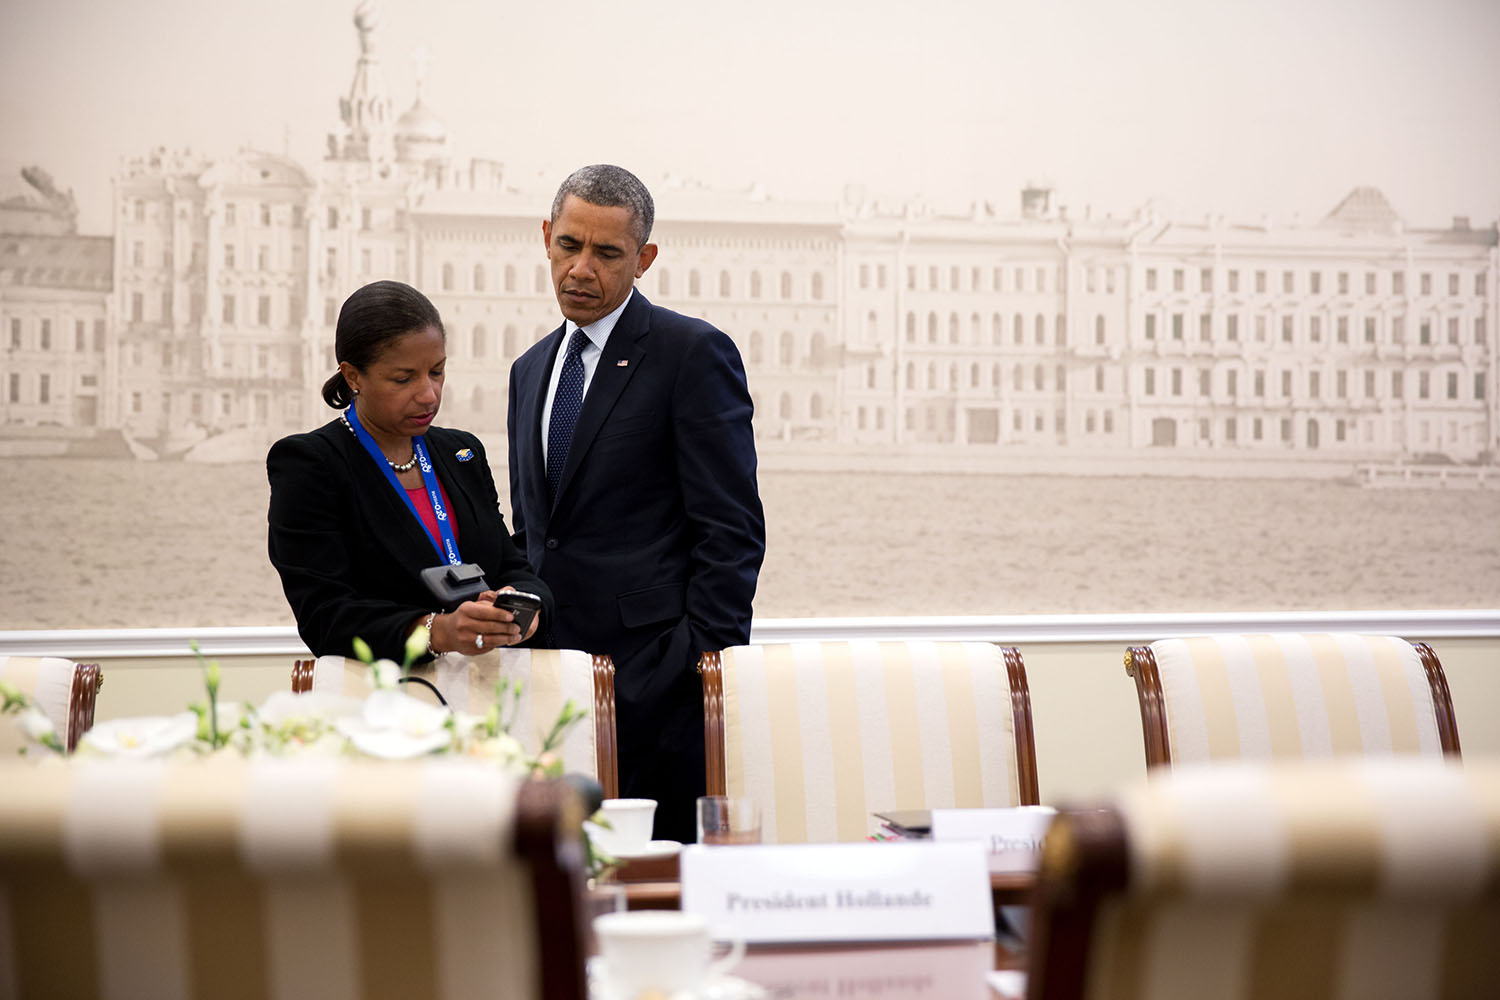 President Obama and Susan Rice at G20 in Summit